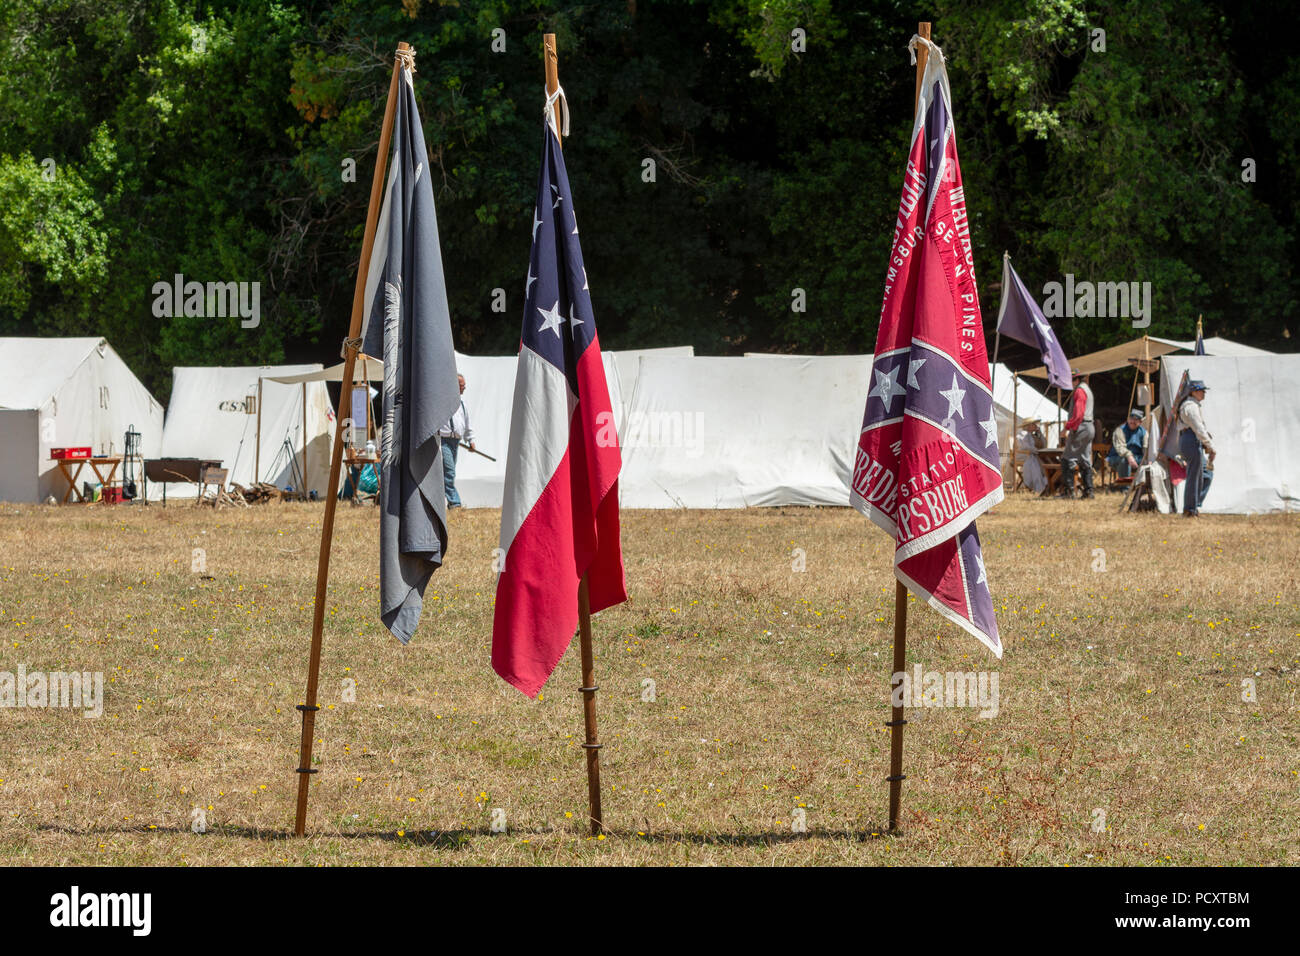 Duncan Mills, CA - July 14, 2018: Confederate flags marking confederate camp at the Northern California's Civil war reenactment. This event is one of  Stock Photo